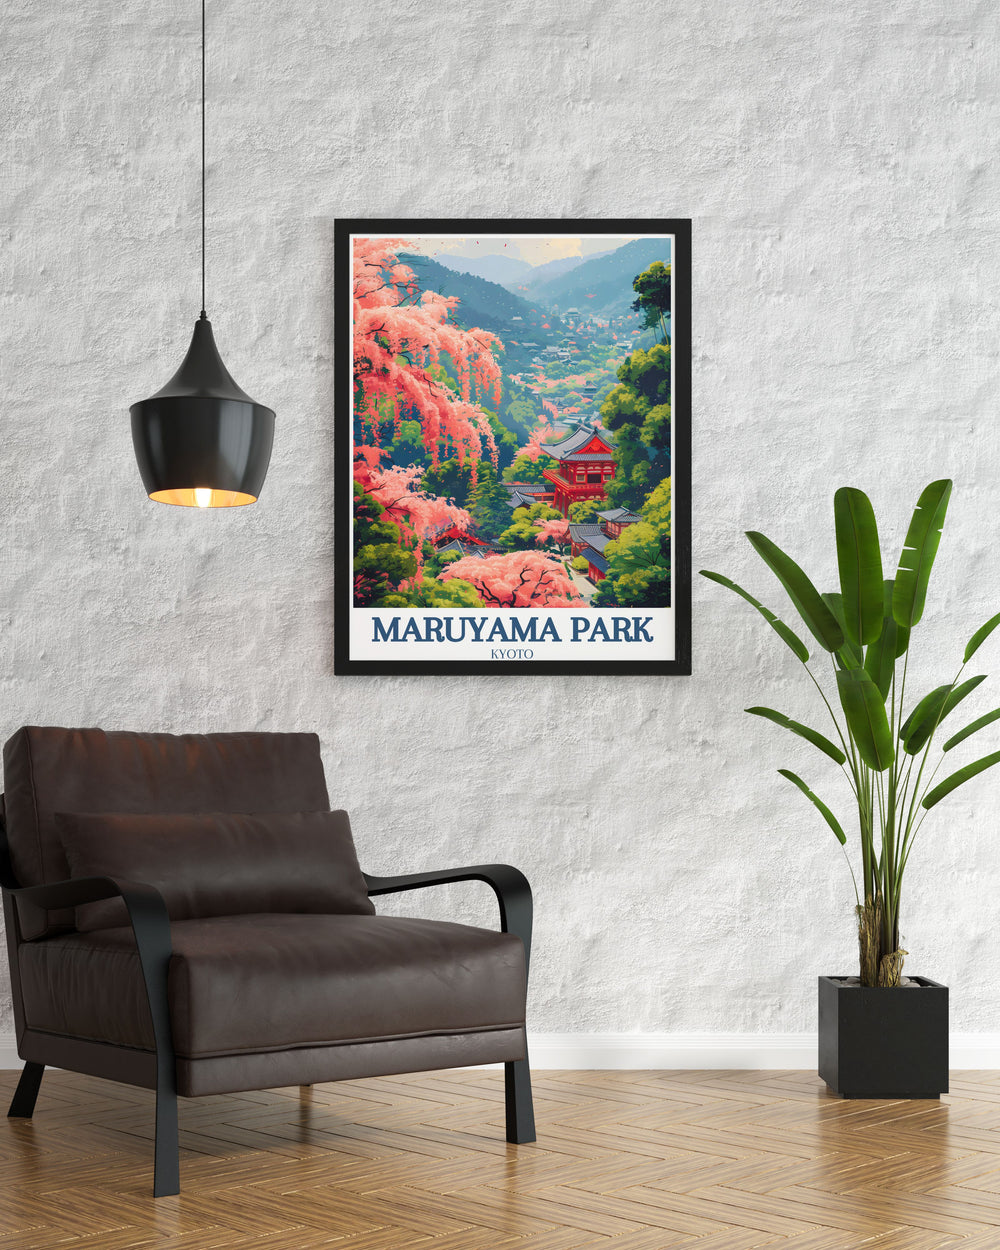 Stunning illustration of Kyoto Yasaka Shrine Shidare Zakura with vibrant cherry blossoms capturing the serene beauty of Japanese gardens a perfect addition to Japan home decor and a thoughtful gift for friends and family who admire Japanese culture